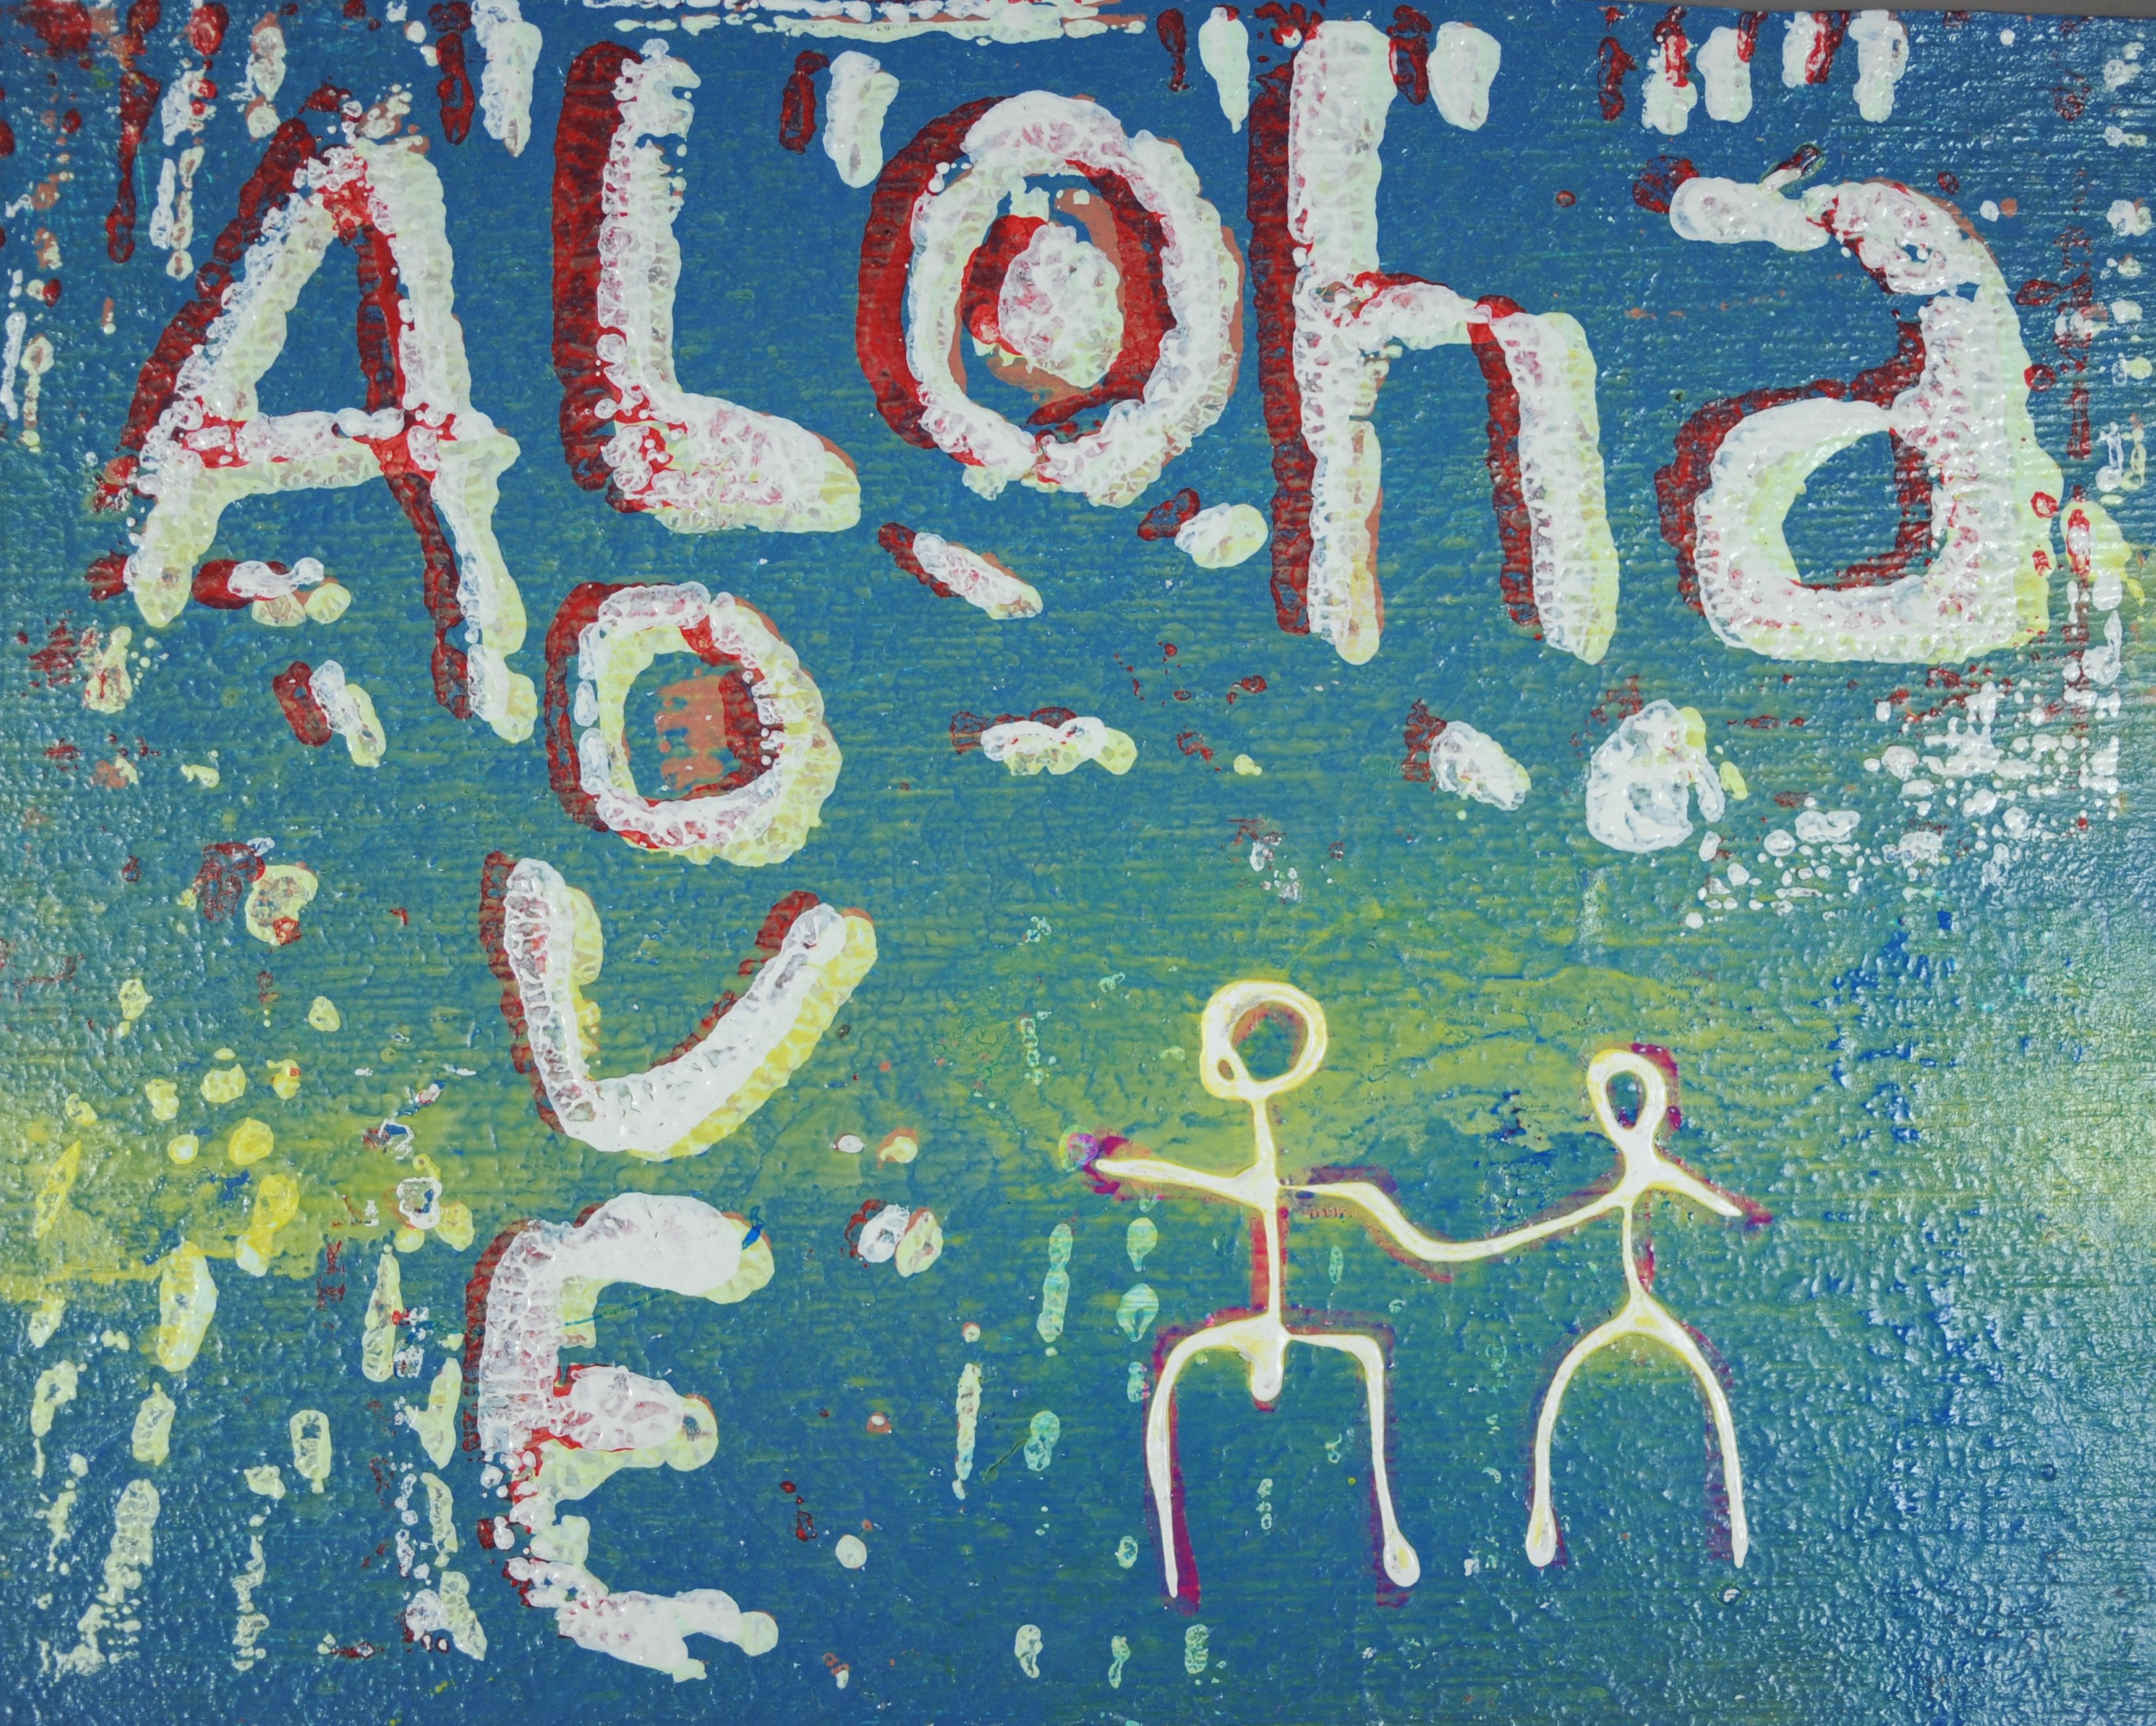 Robert Gann; Aloha Love 4, 2020, Original Printmaking Other, 10 x 10 inches. Artwork description: 241 inspired by the culture of Hawaii, acrylic mud print...